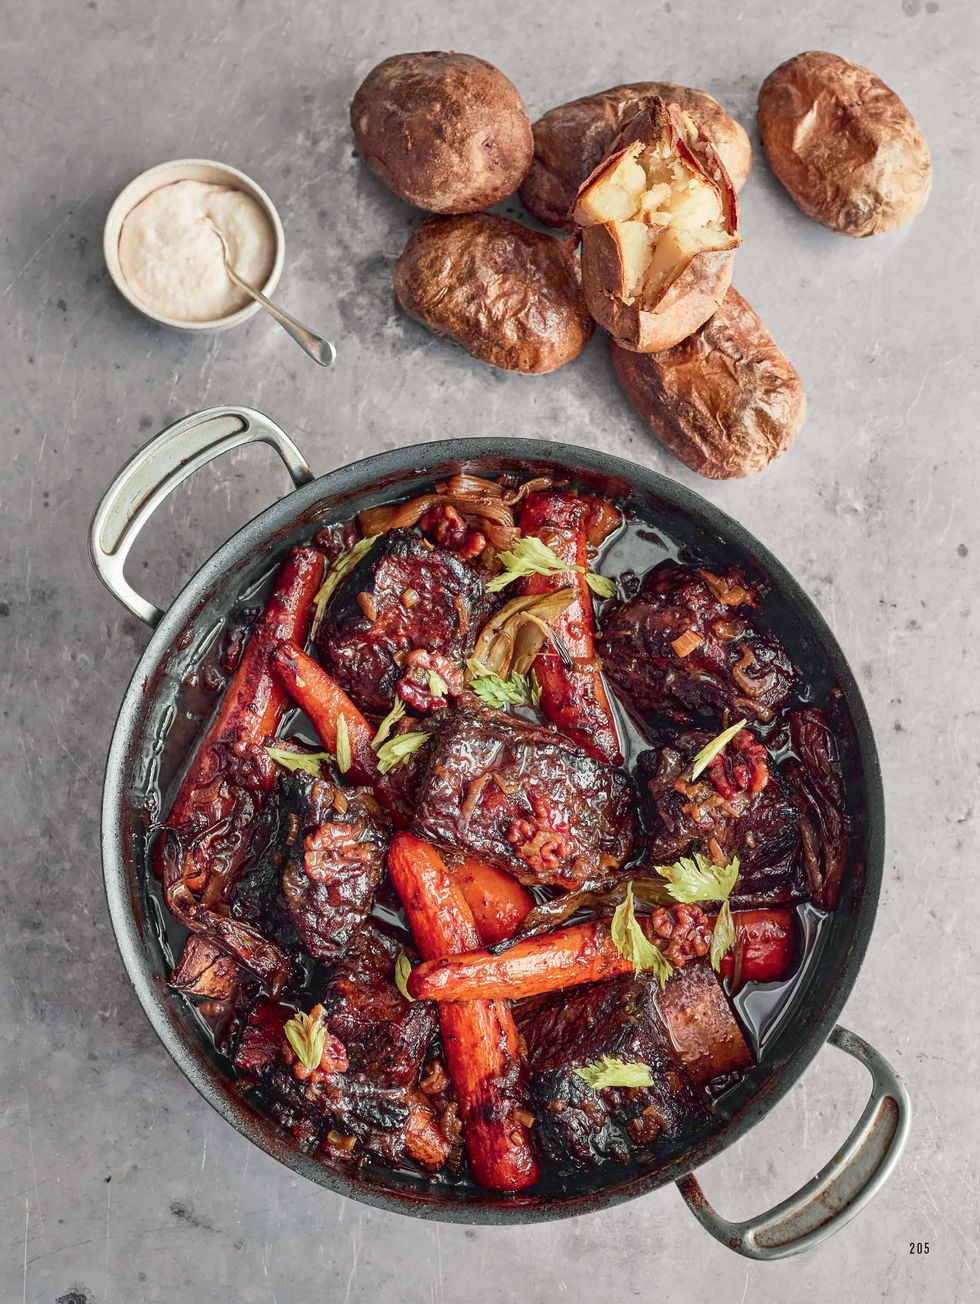 Jamie Oliver’s One Pan Recipes for No-Fuss, No-Muss Easy Cooking